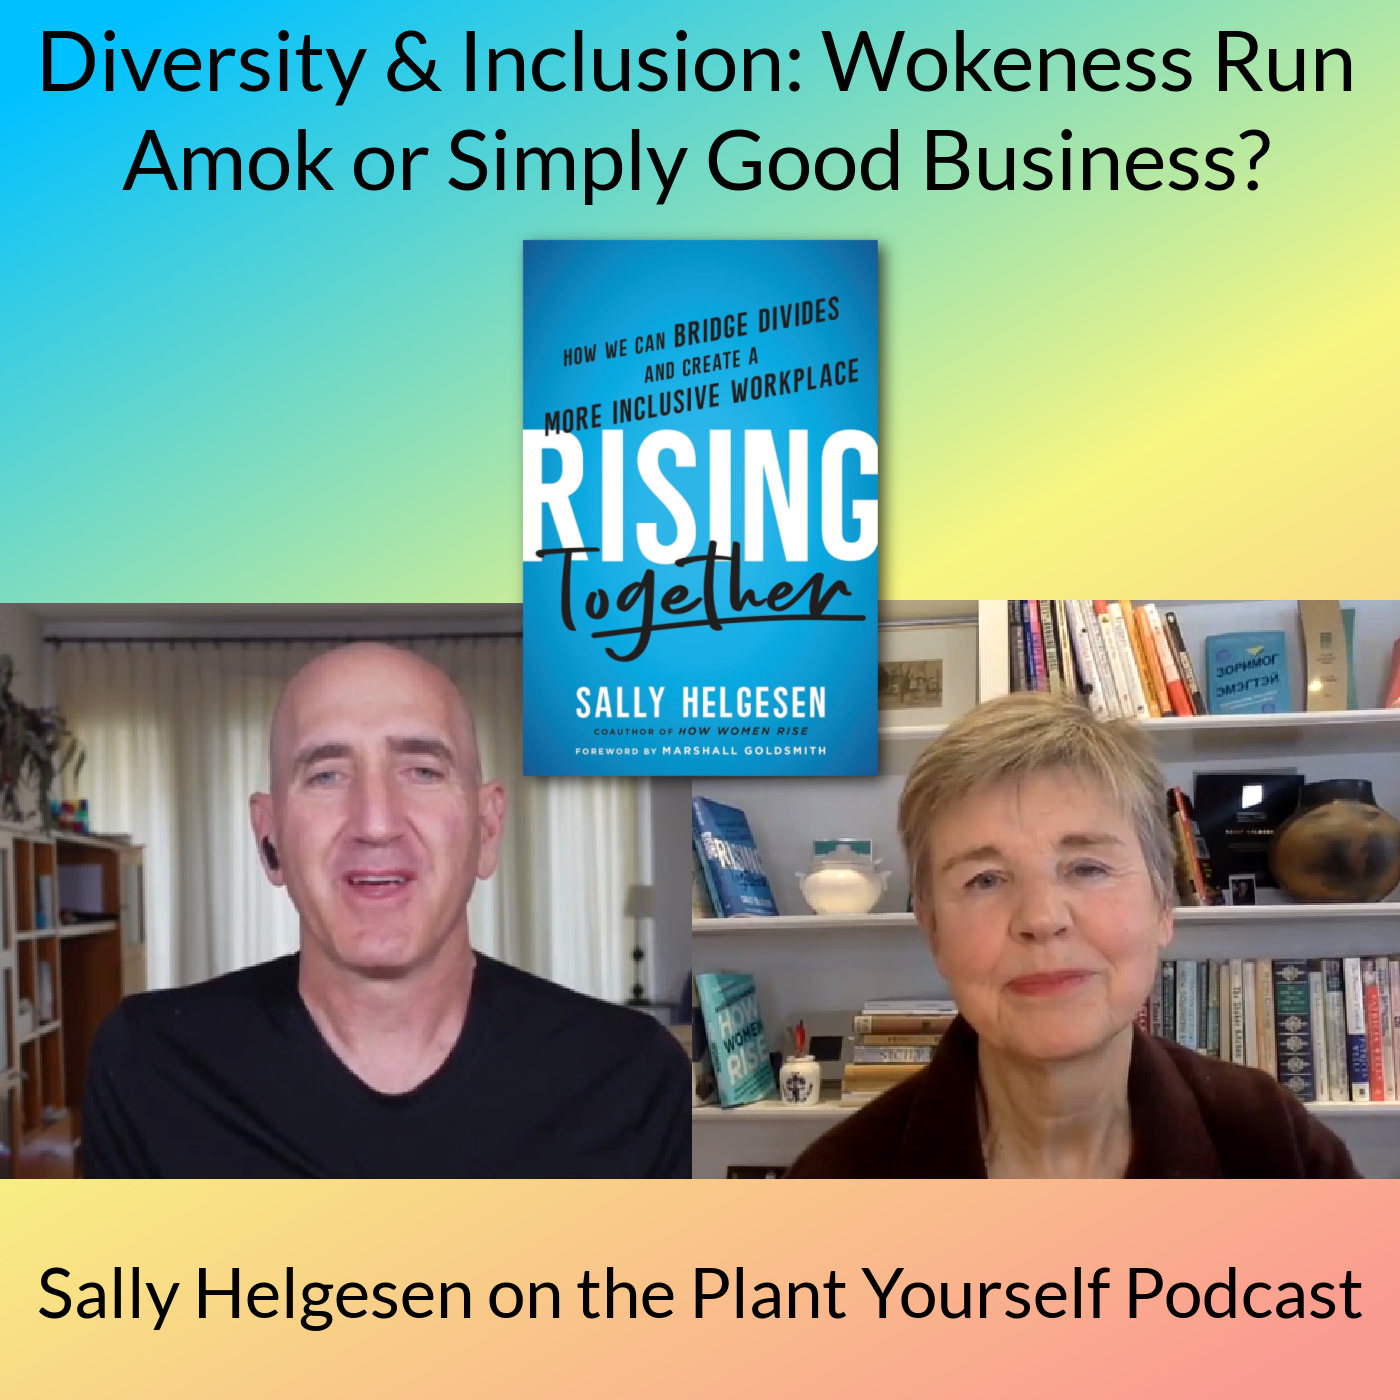 Diversity & Inclusion: Wokeness Run Amok or Simply Good Business?: Sally Helgesen on Plant Yourself